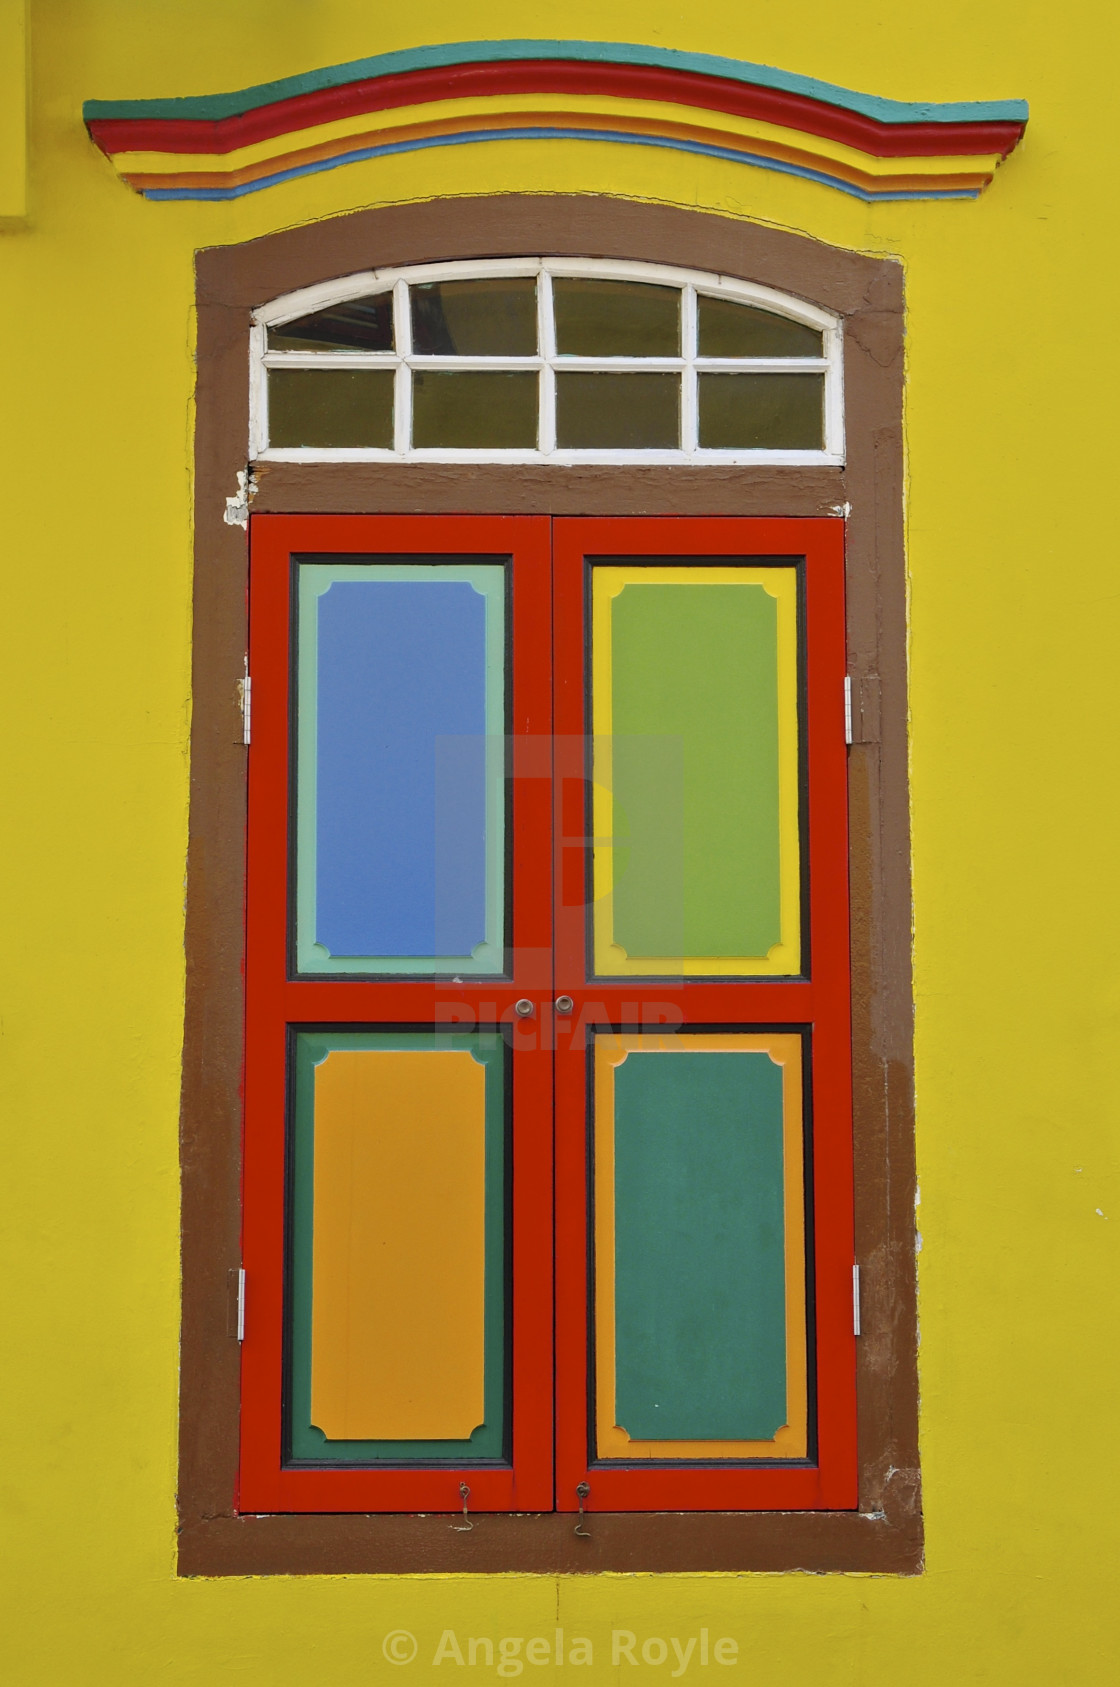 "Colourful window shutters" stock image